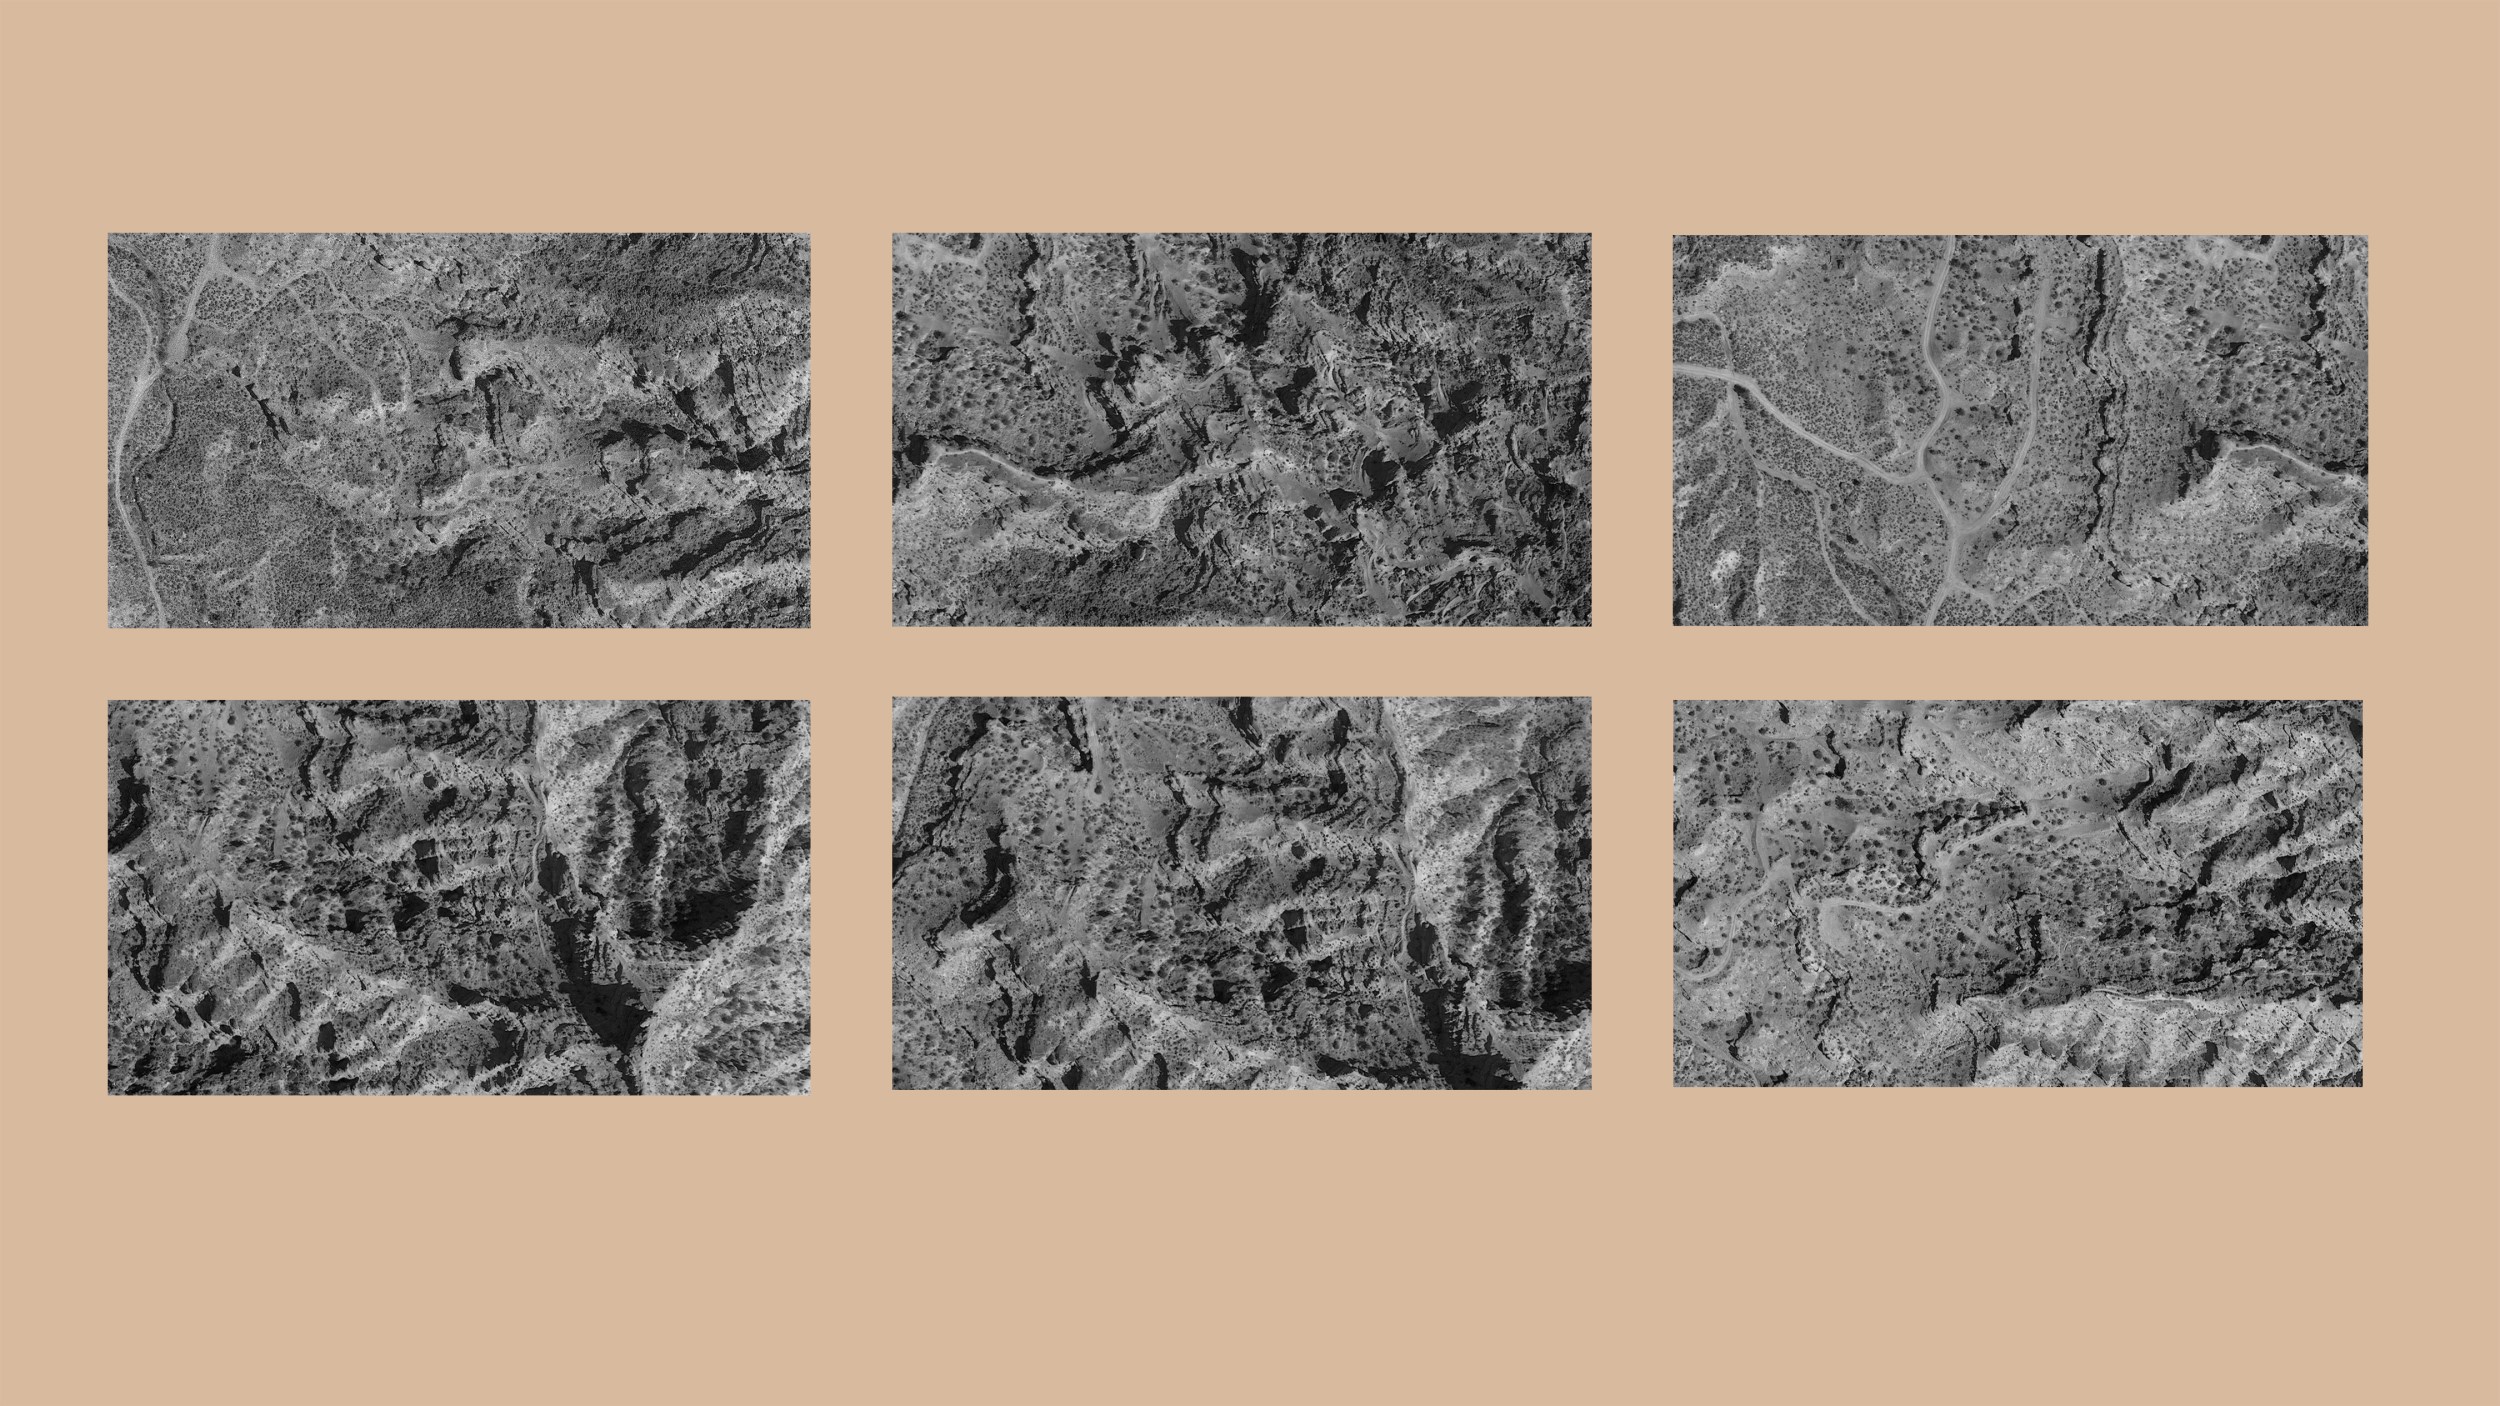 Two rows of three black and white images of a rock surface, set against a flesh-colored surface.